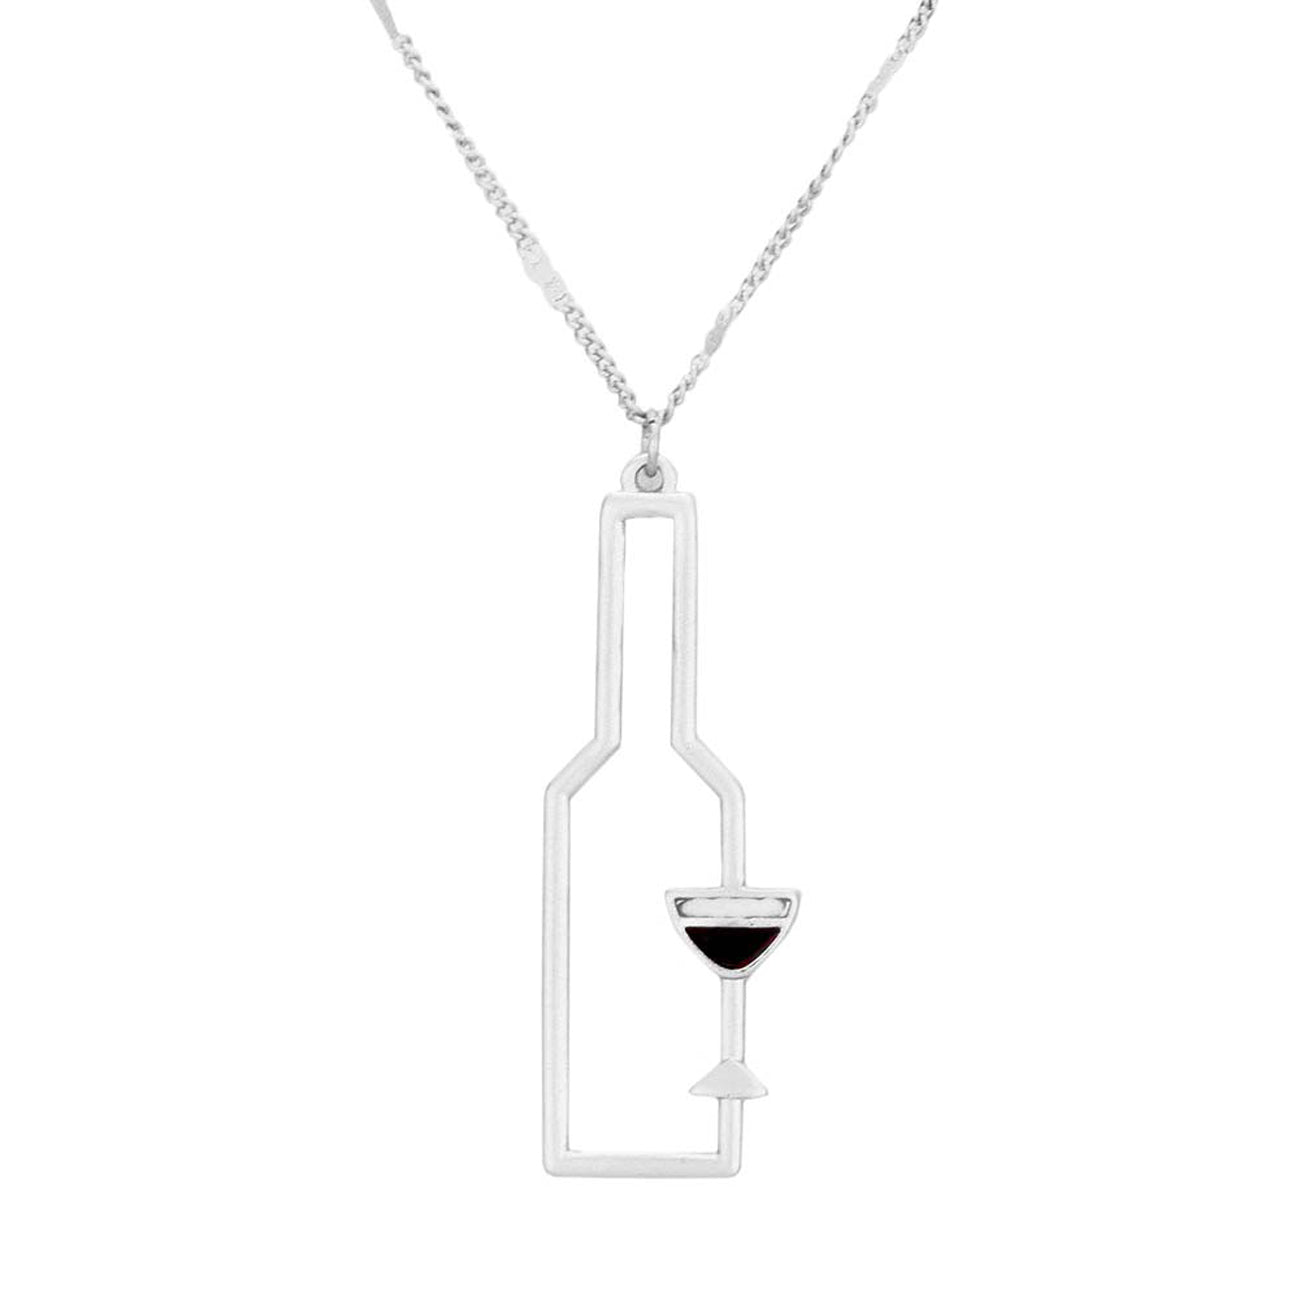 Matte Silver Wine Pendant Necklace, Wine Bottle & Glass necklace is dainty, gorgeous, and hilarious. Treat yourself to fun and unique jewelry pieces that are perfect for any occasion. This delightful Wine Pendant necklace enhances any outfit with timeless elegance & feels absolutely flawless.